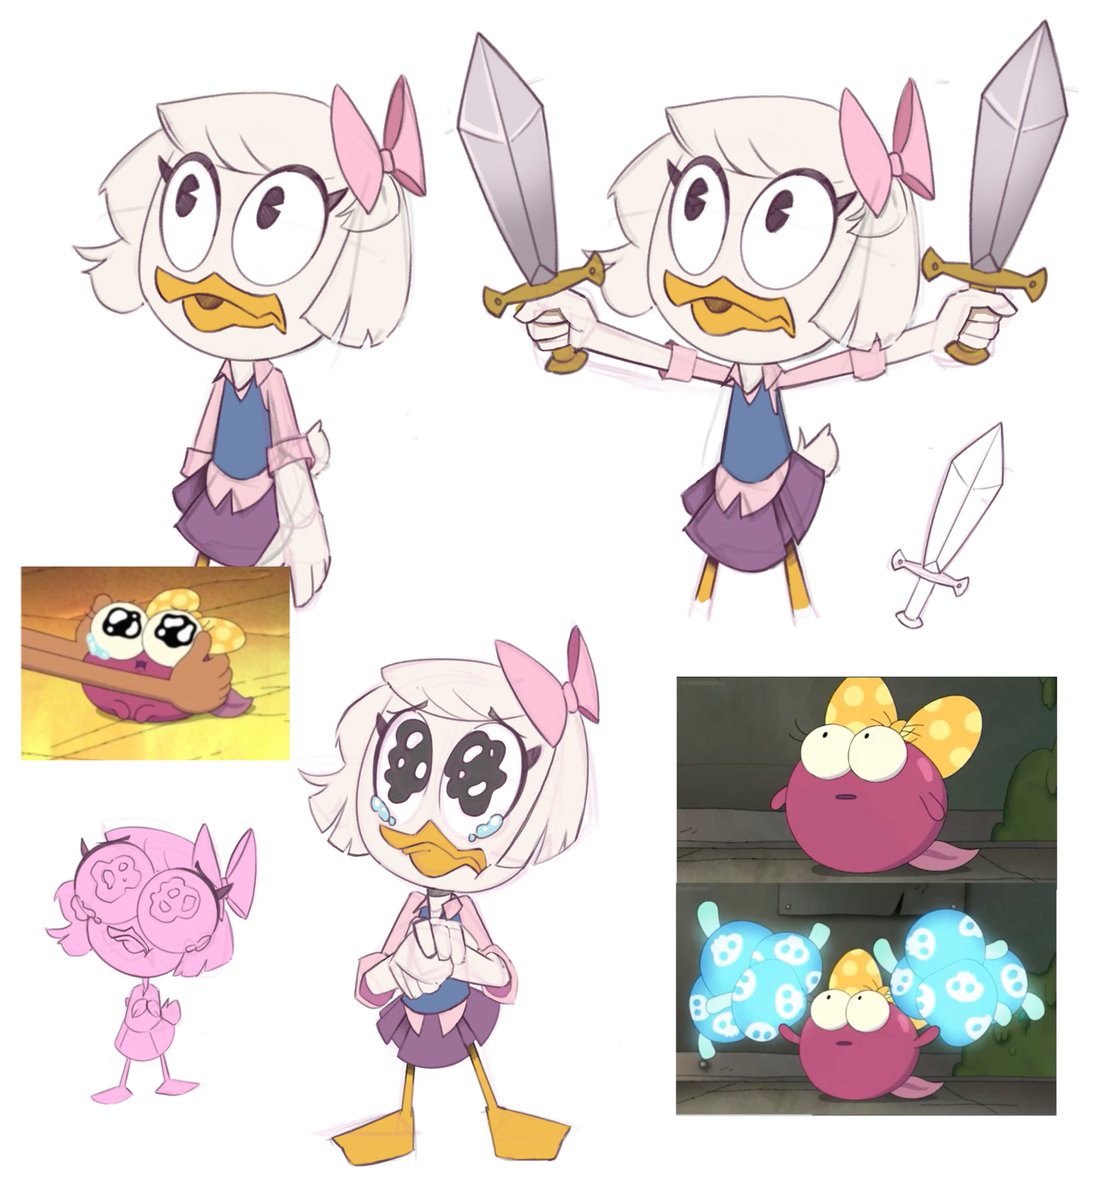 I think they would be good friends 😊🥹#ducktales #webbyvanderquack #screenshotredraw